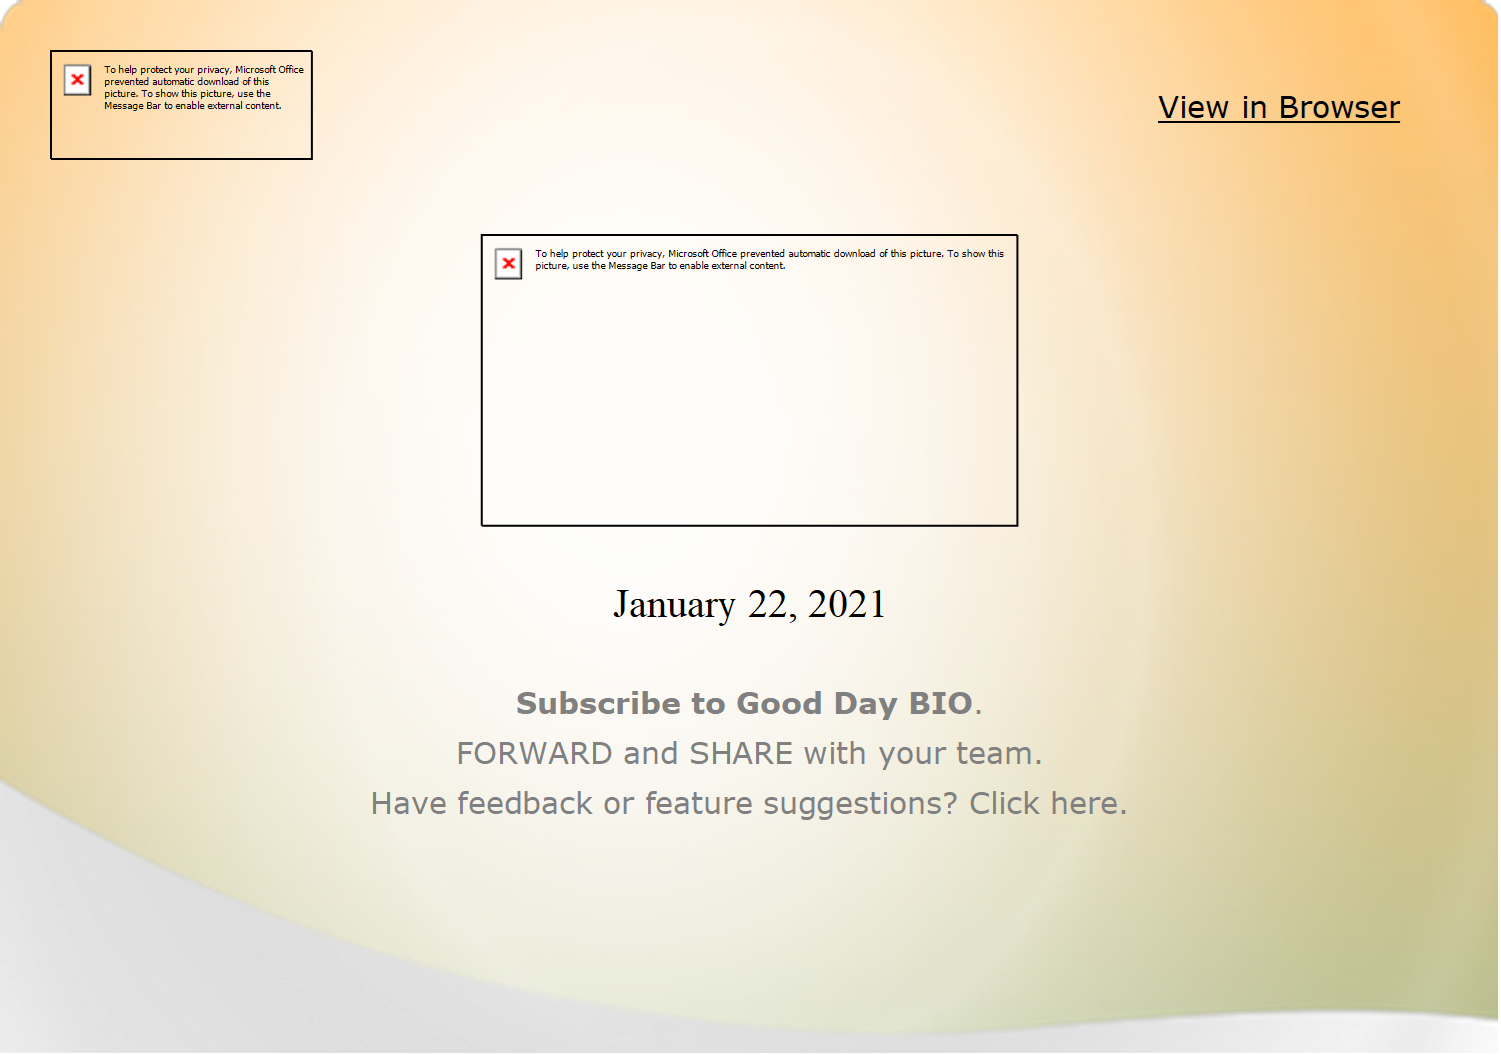  	          	  	View in Browser                  January 22, 2021  Subscribe to Good Day BIO.   FORWARD and SHARE with your team.   Have feedback or feature suggestions? Click here.               	       